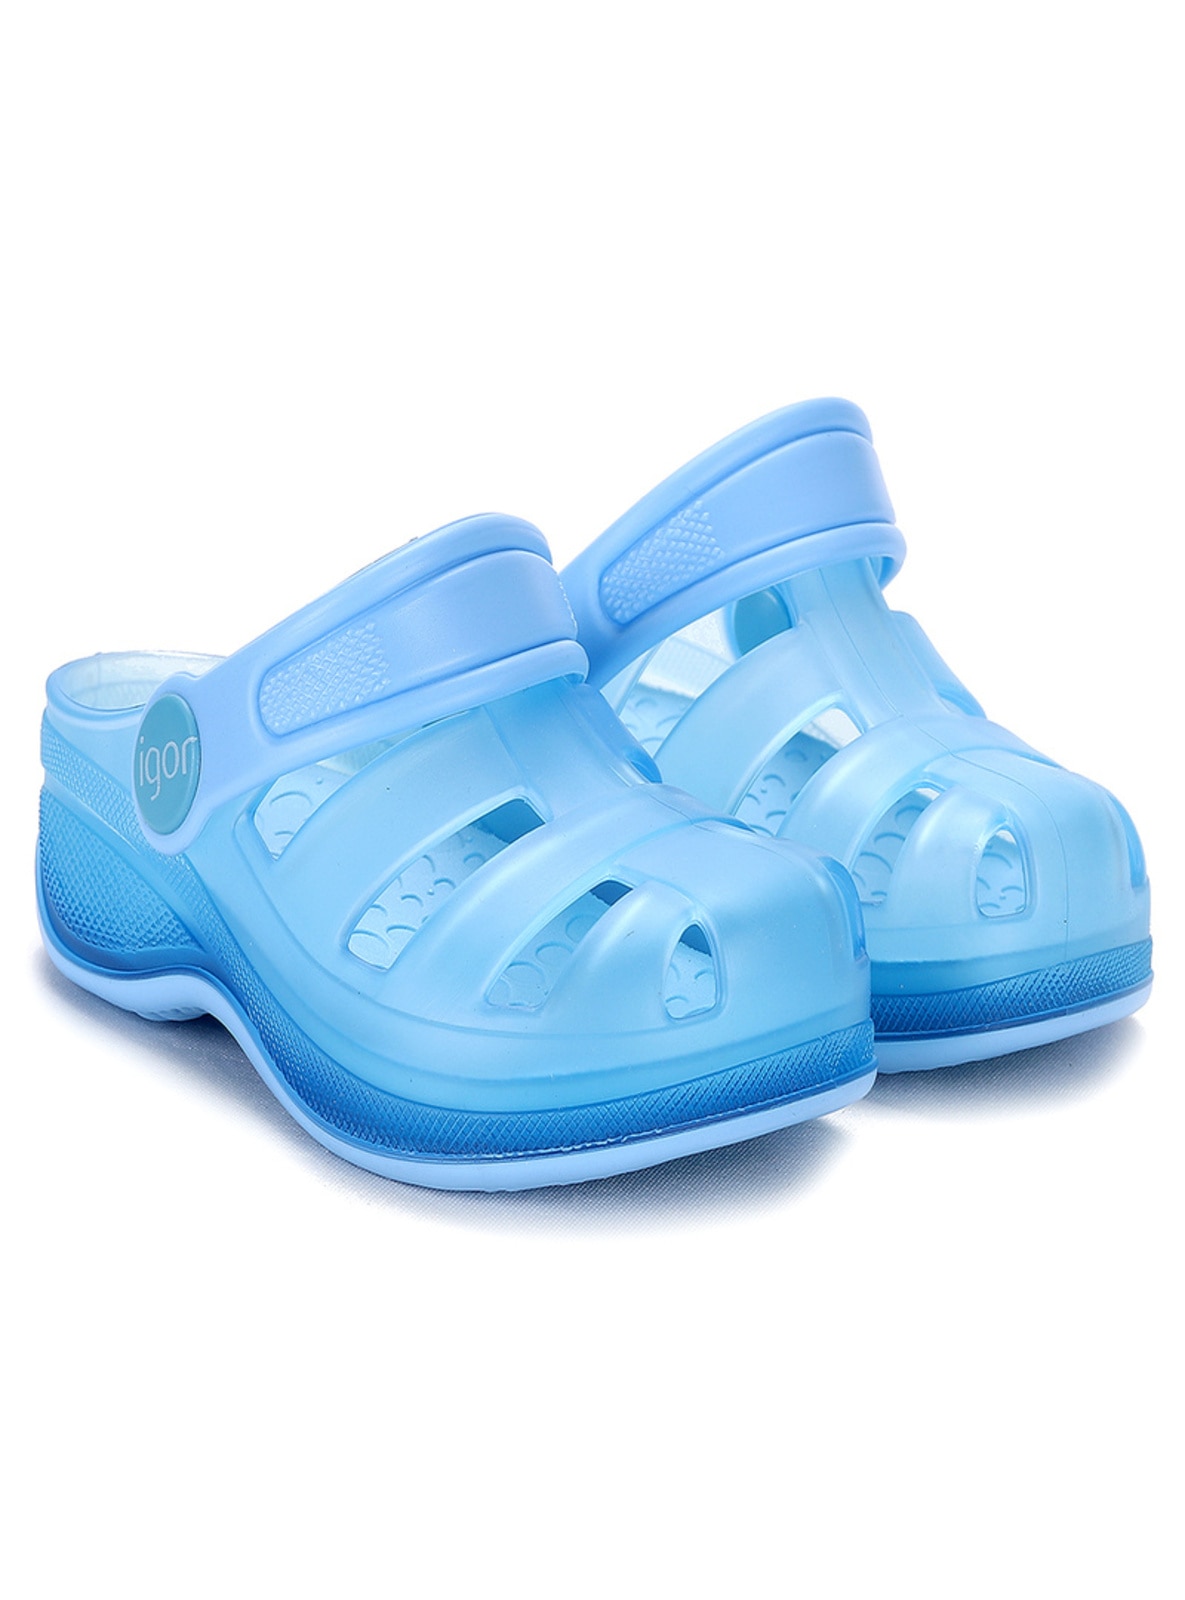 Sandal - Blue - - Baby Blue - Kids Water Shoes